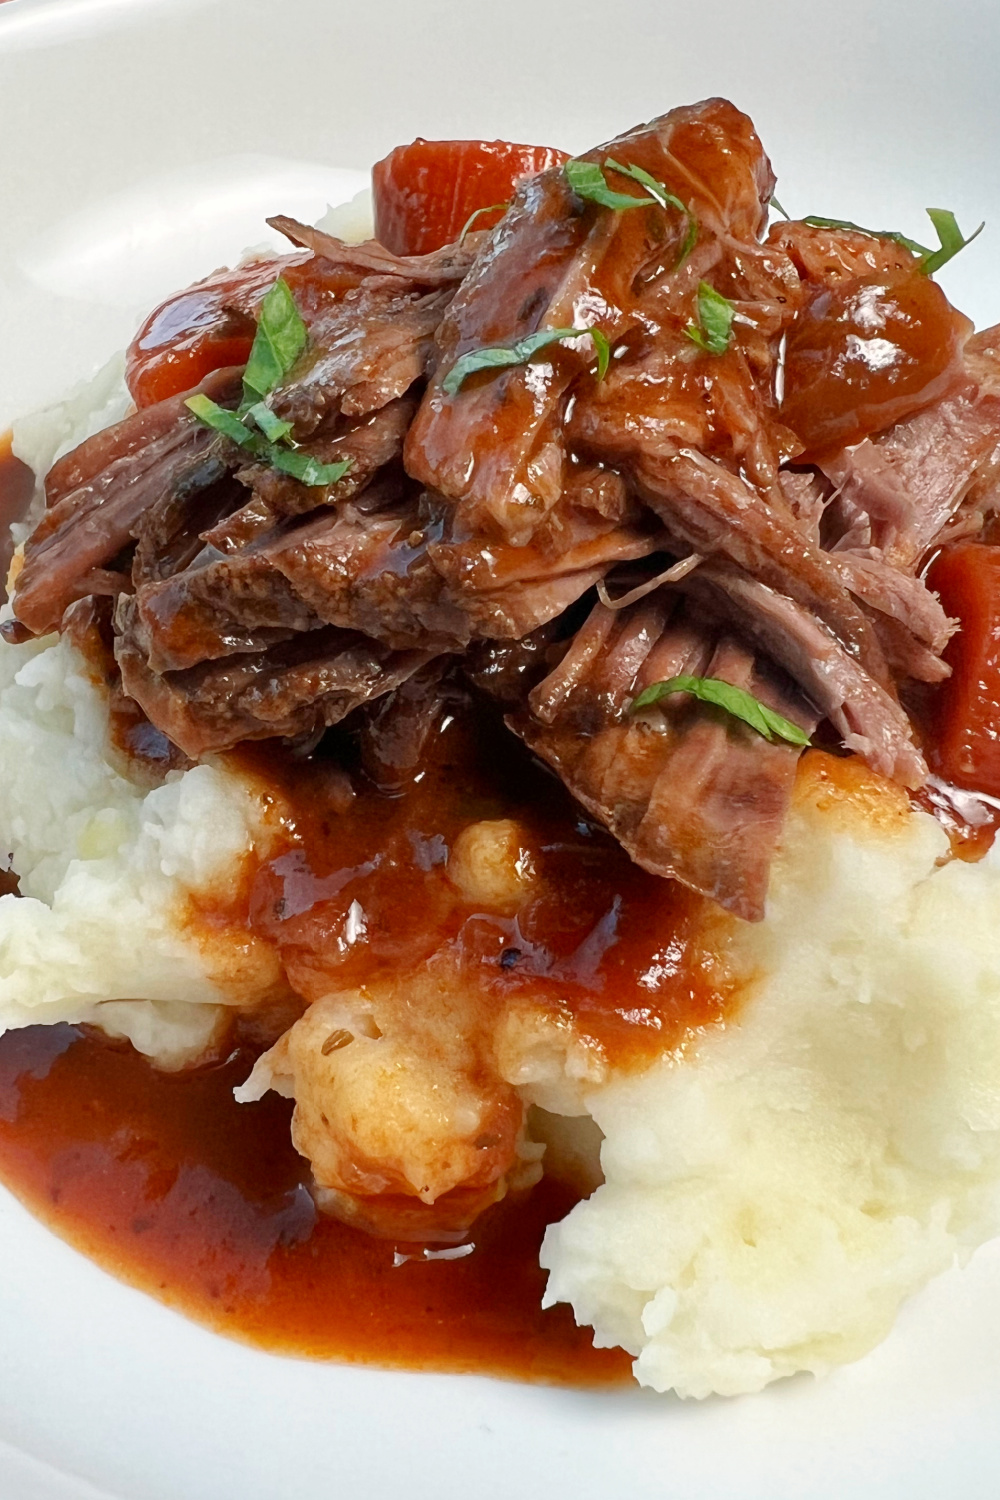 Shredded chuck tender roast with gravy on a bed of mashed potatoes. 